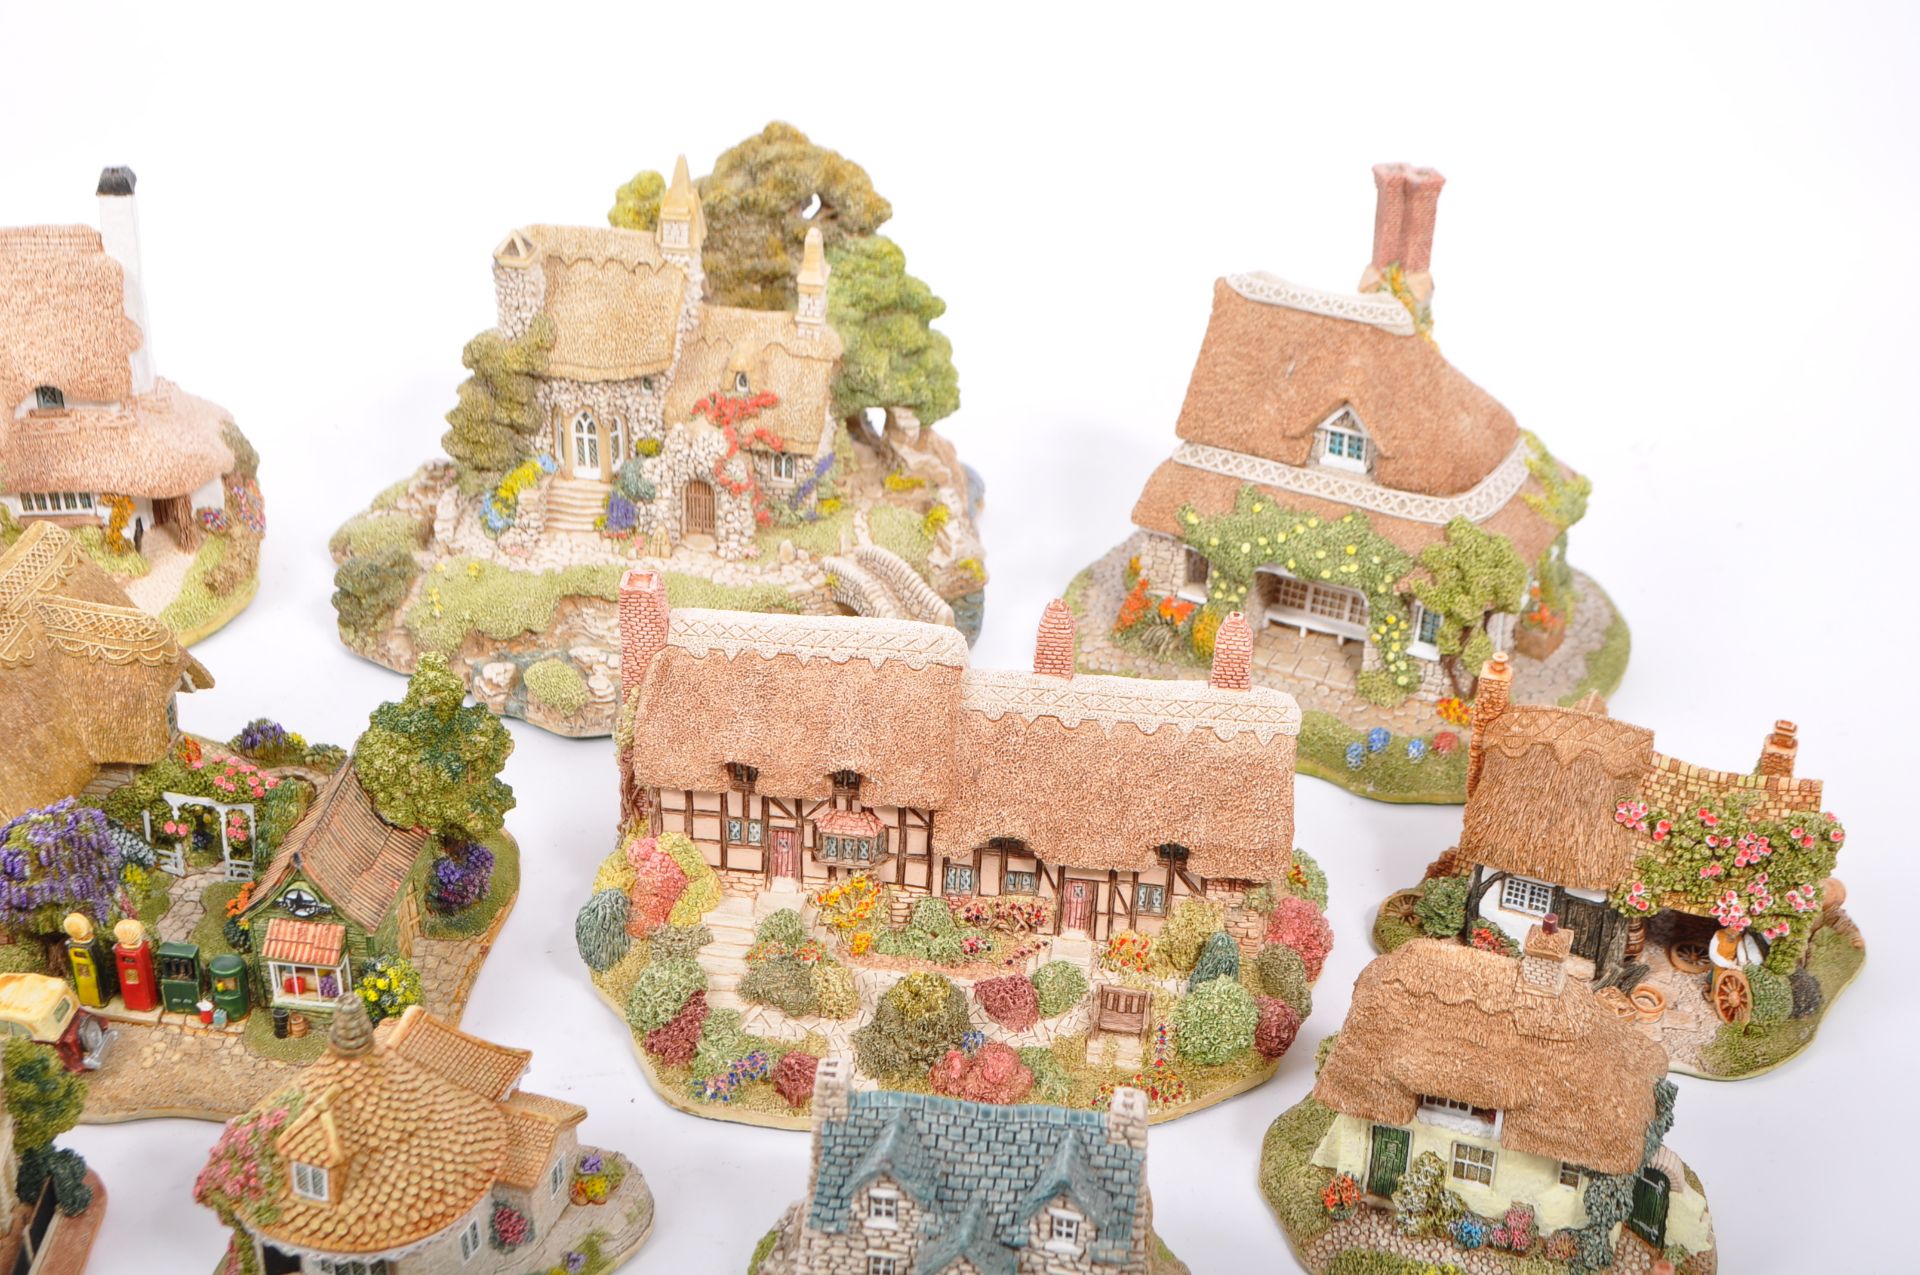 COLLECTION OF VINTAGE LILLIPUT LANE COTTAGE FIGURES UNBOXED - Image 5 of 6